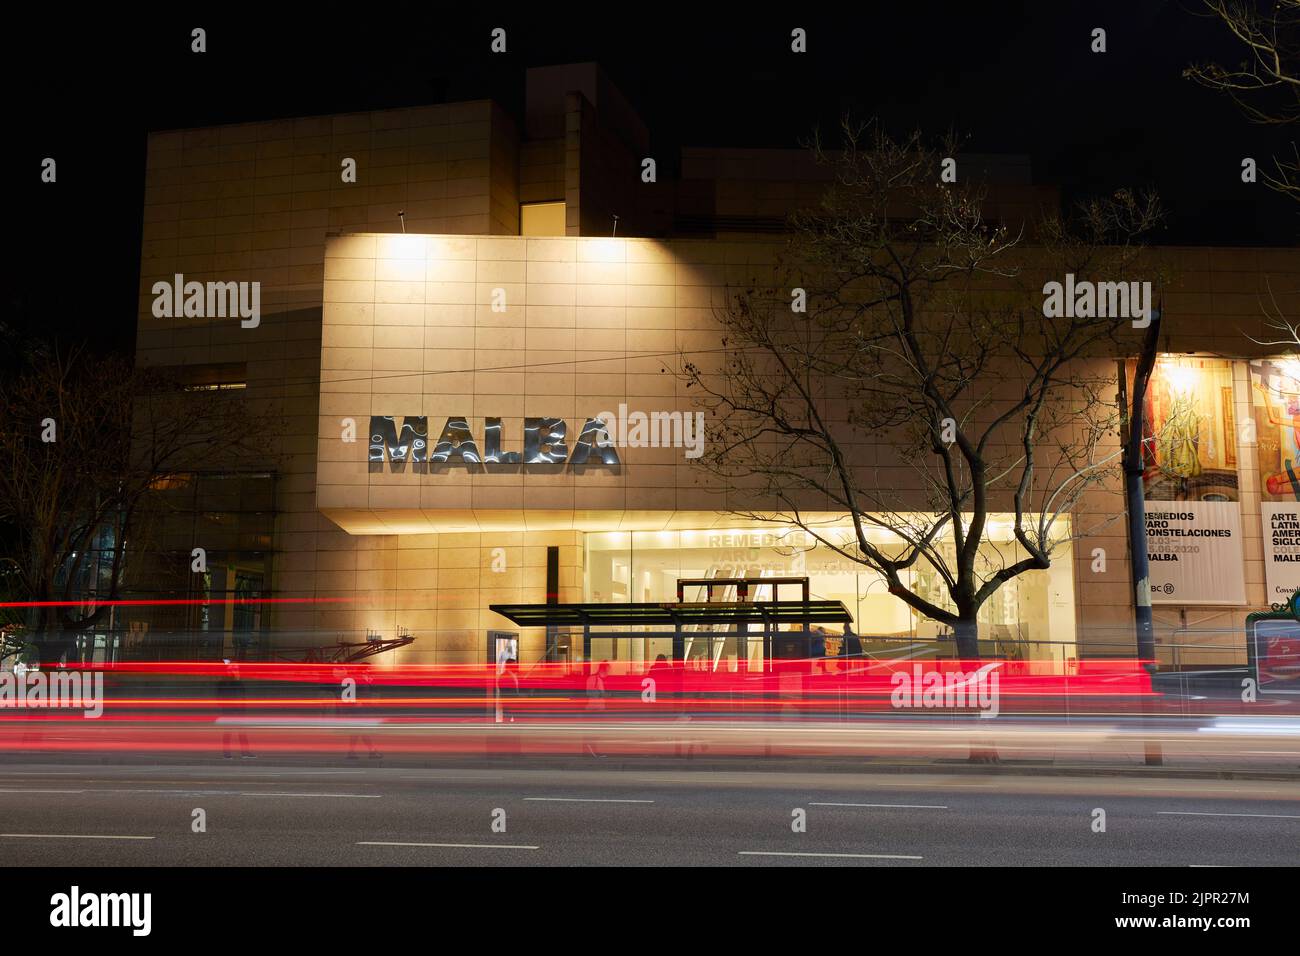 The main facade of the MALBA Museum of Latin American Art, Palermo, Buenos Aires, Argentina. Stock Photo